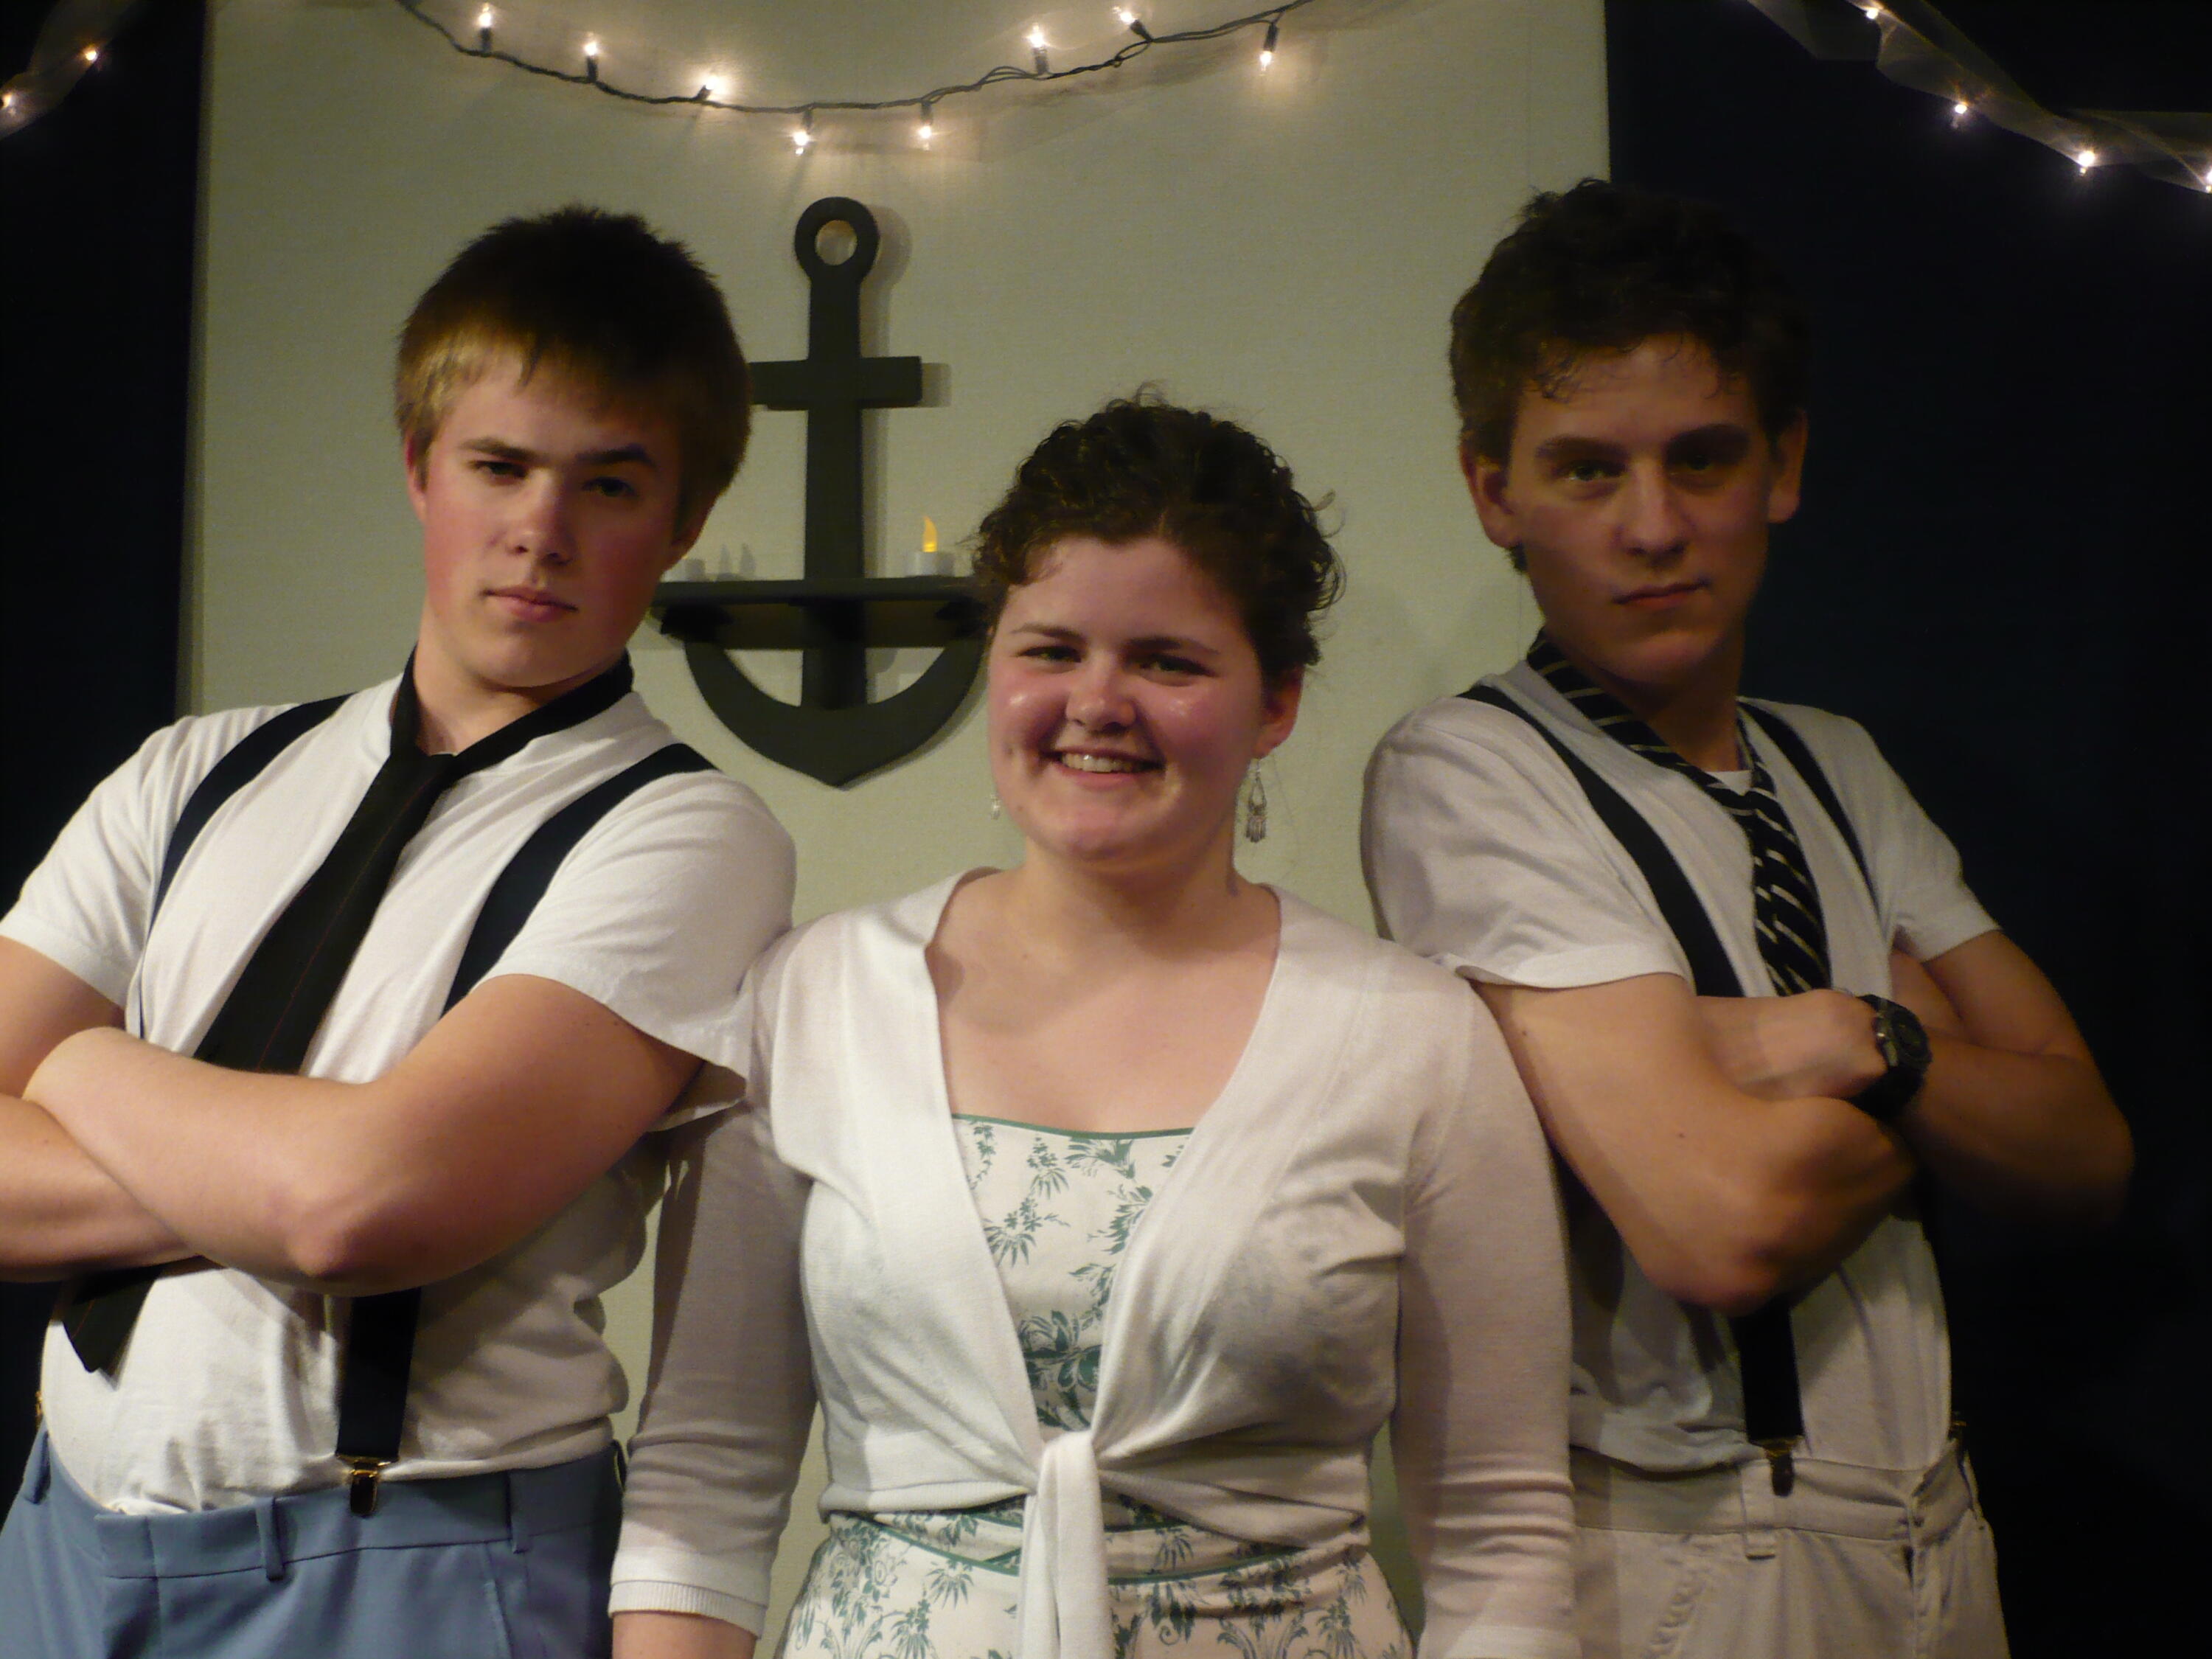 Three students dressed up as characters for the Grebel Talent Show (2000s)